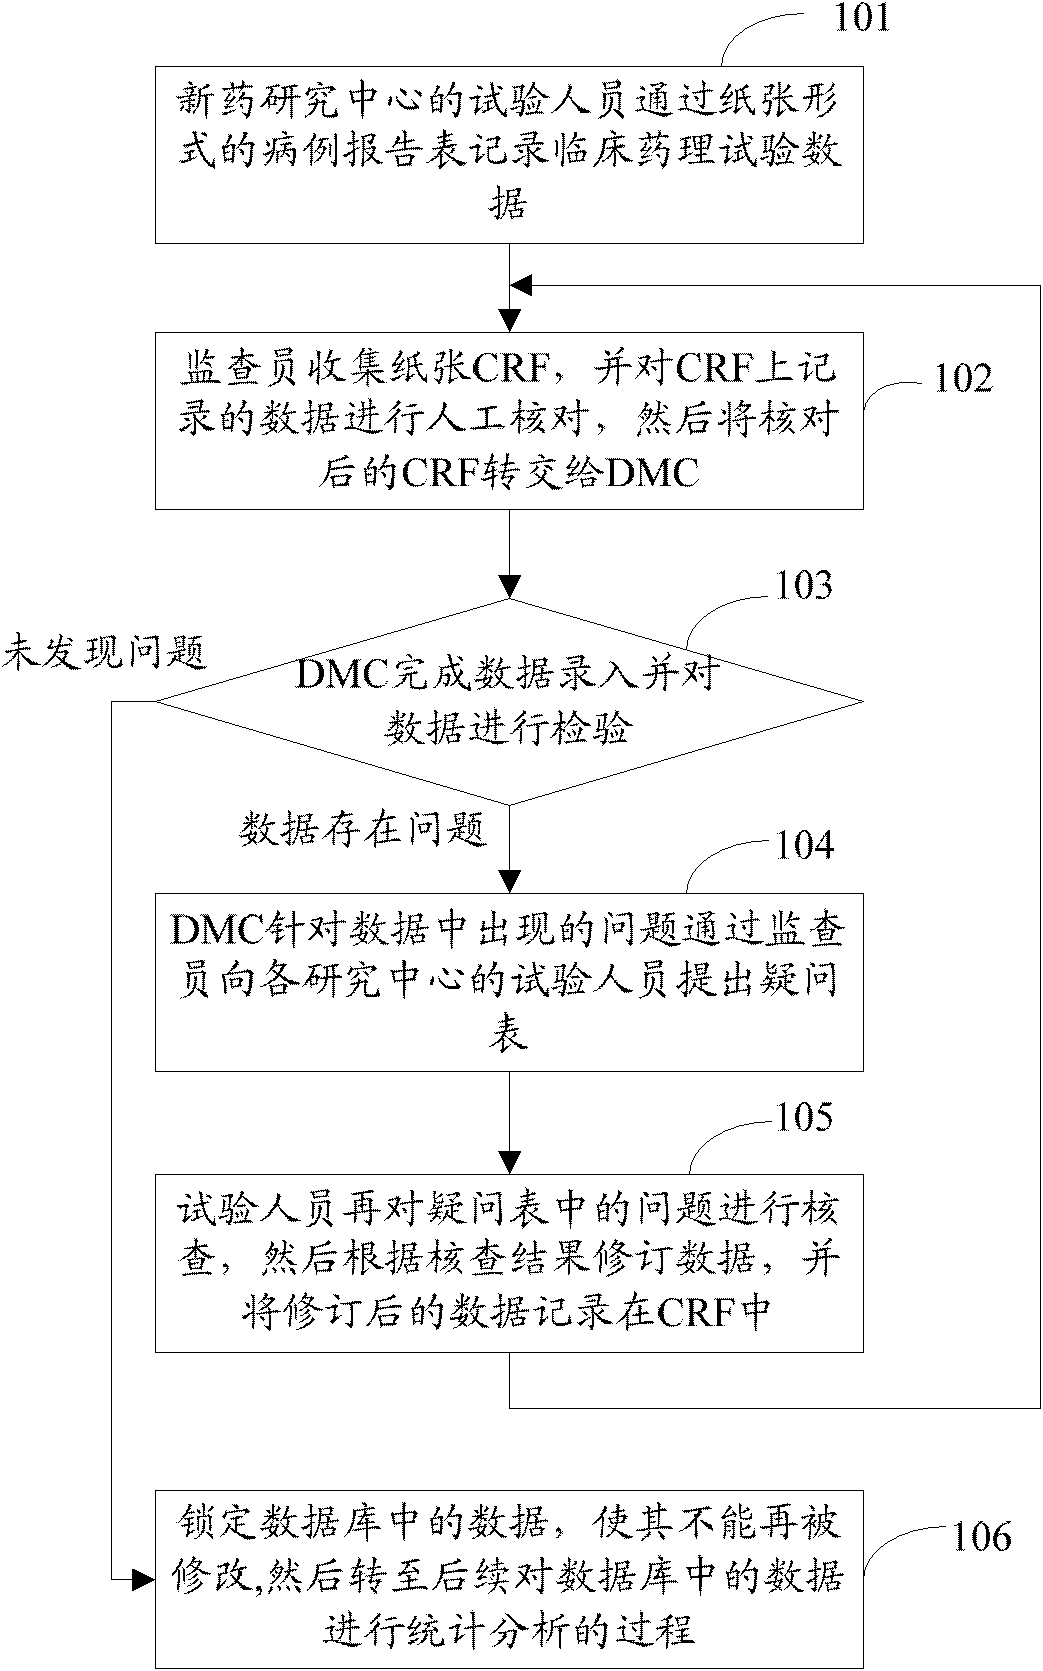 Clinical pharmacological test information processing system